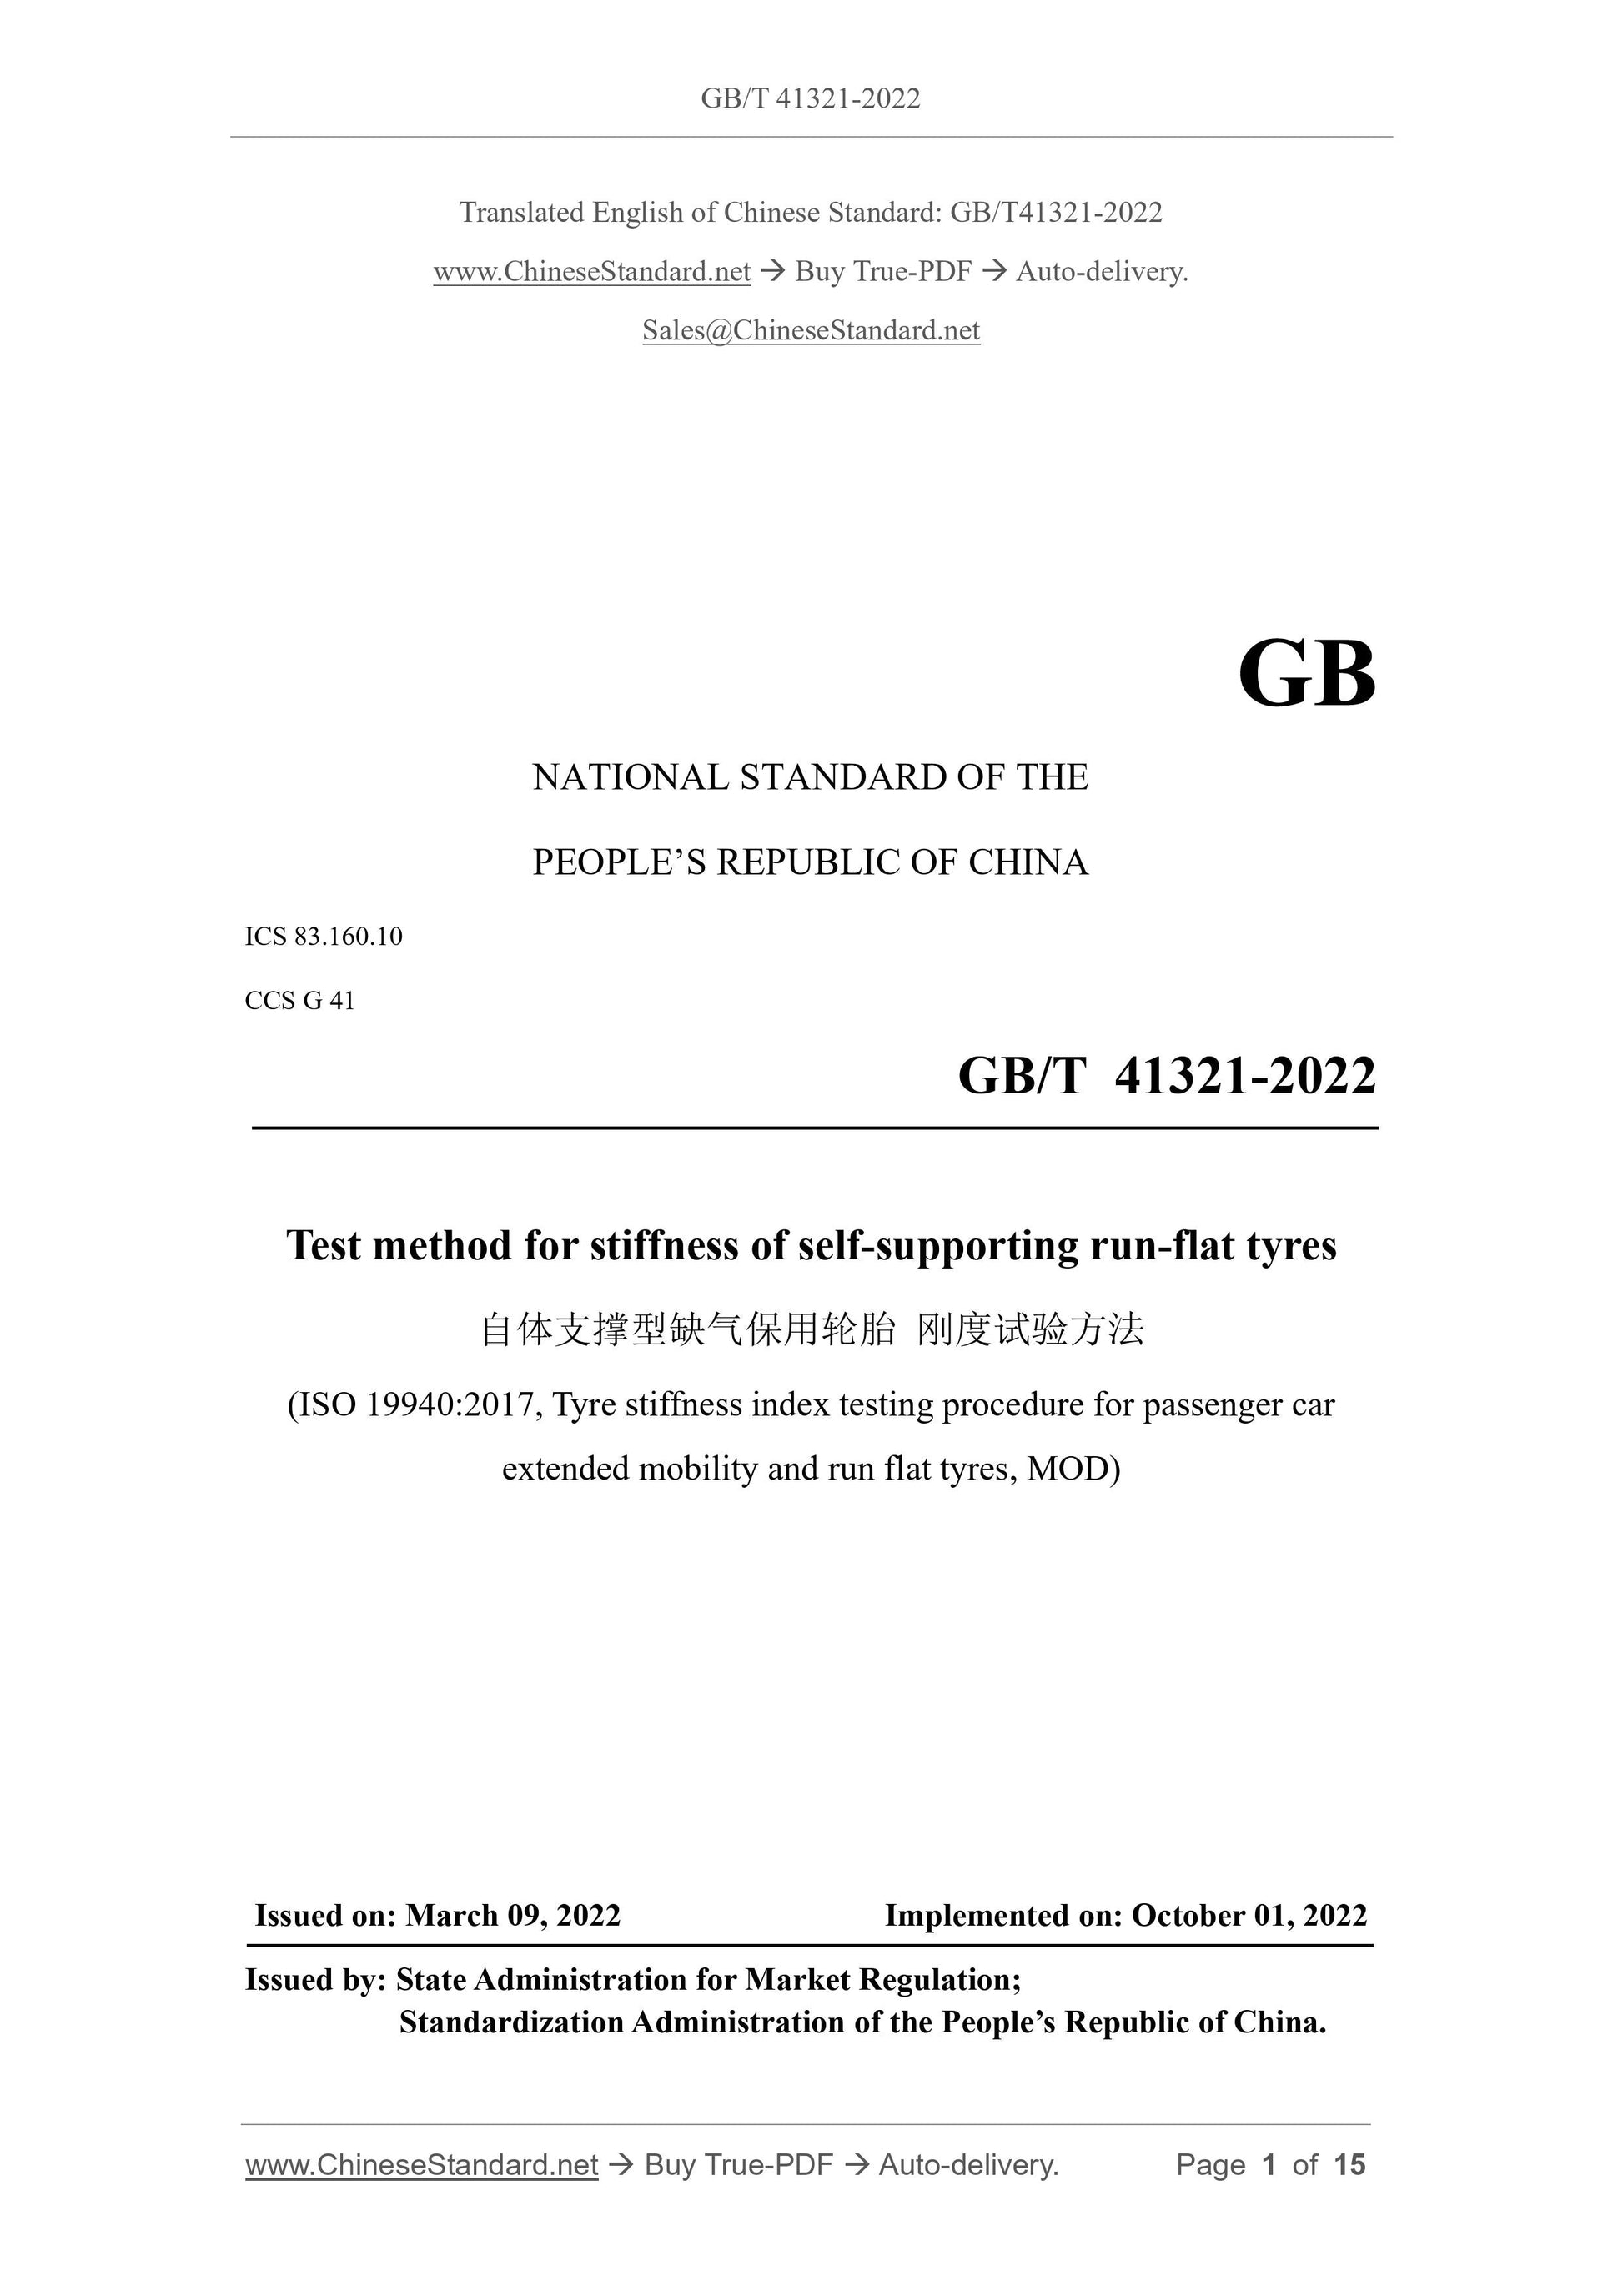 GB/T 41321-2022 Page 1